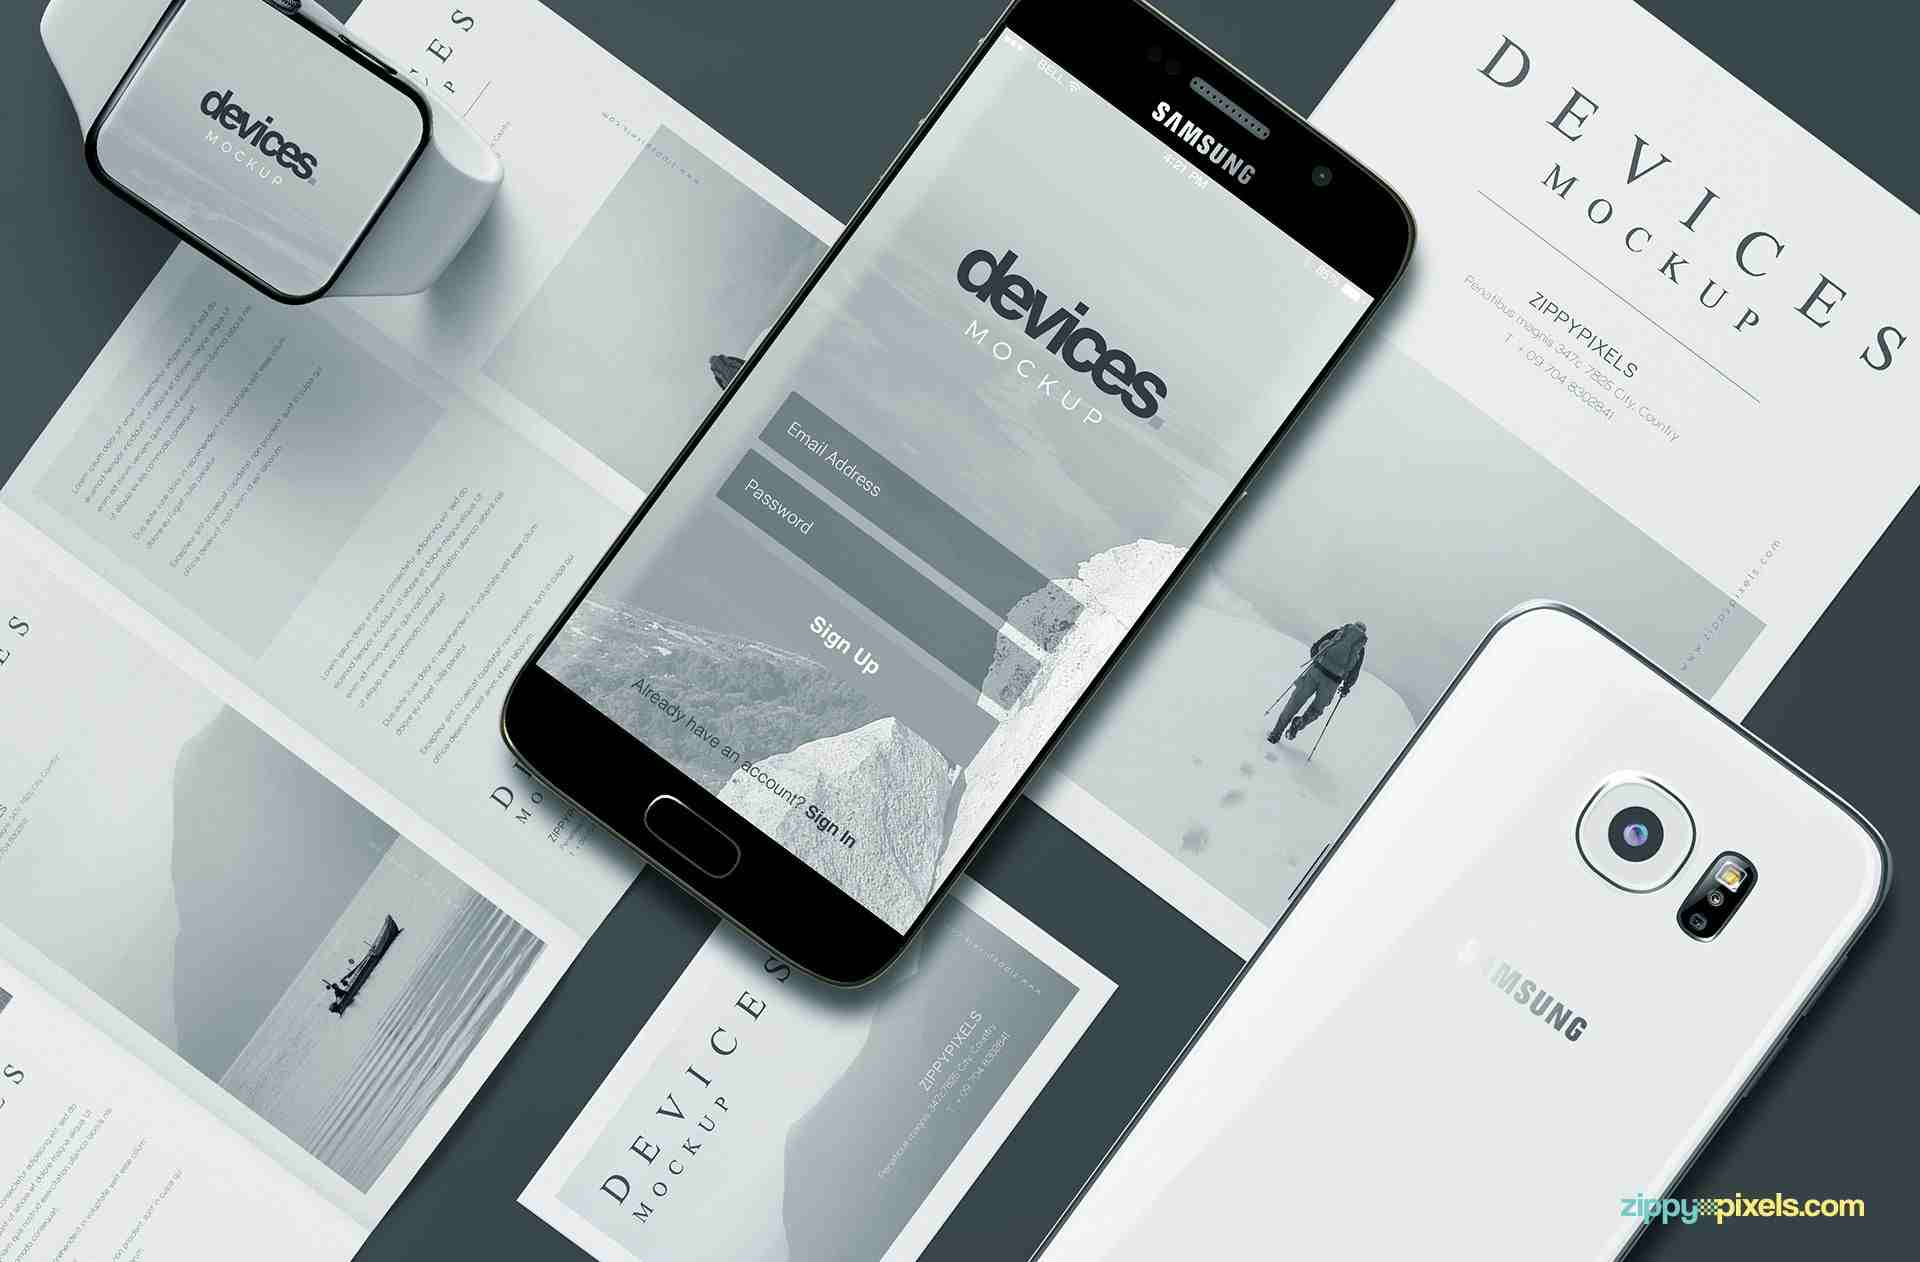 30 Best Free Android Mockup Templates and Mockup Tools in 2020（Updated）